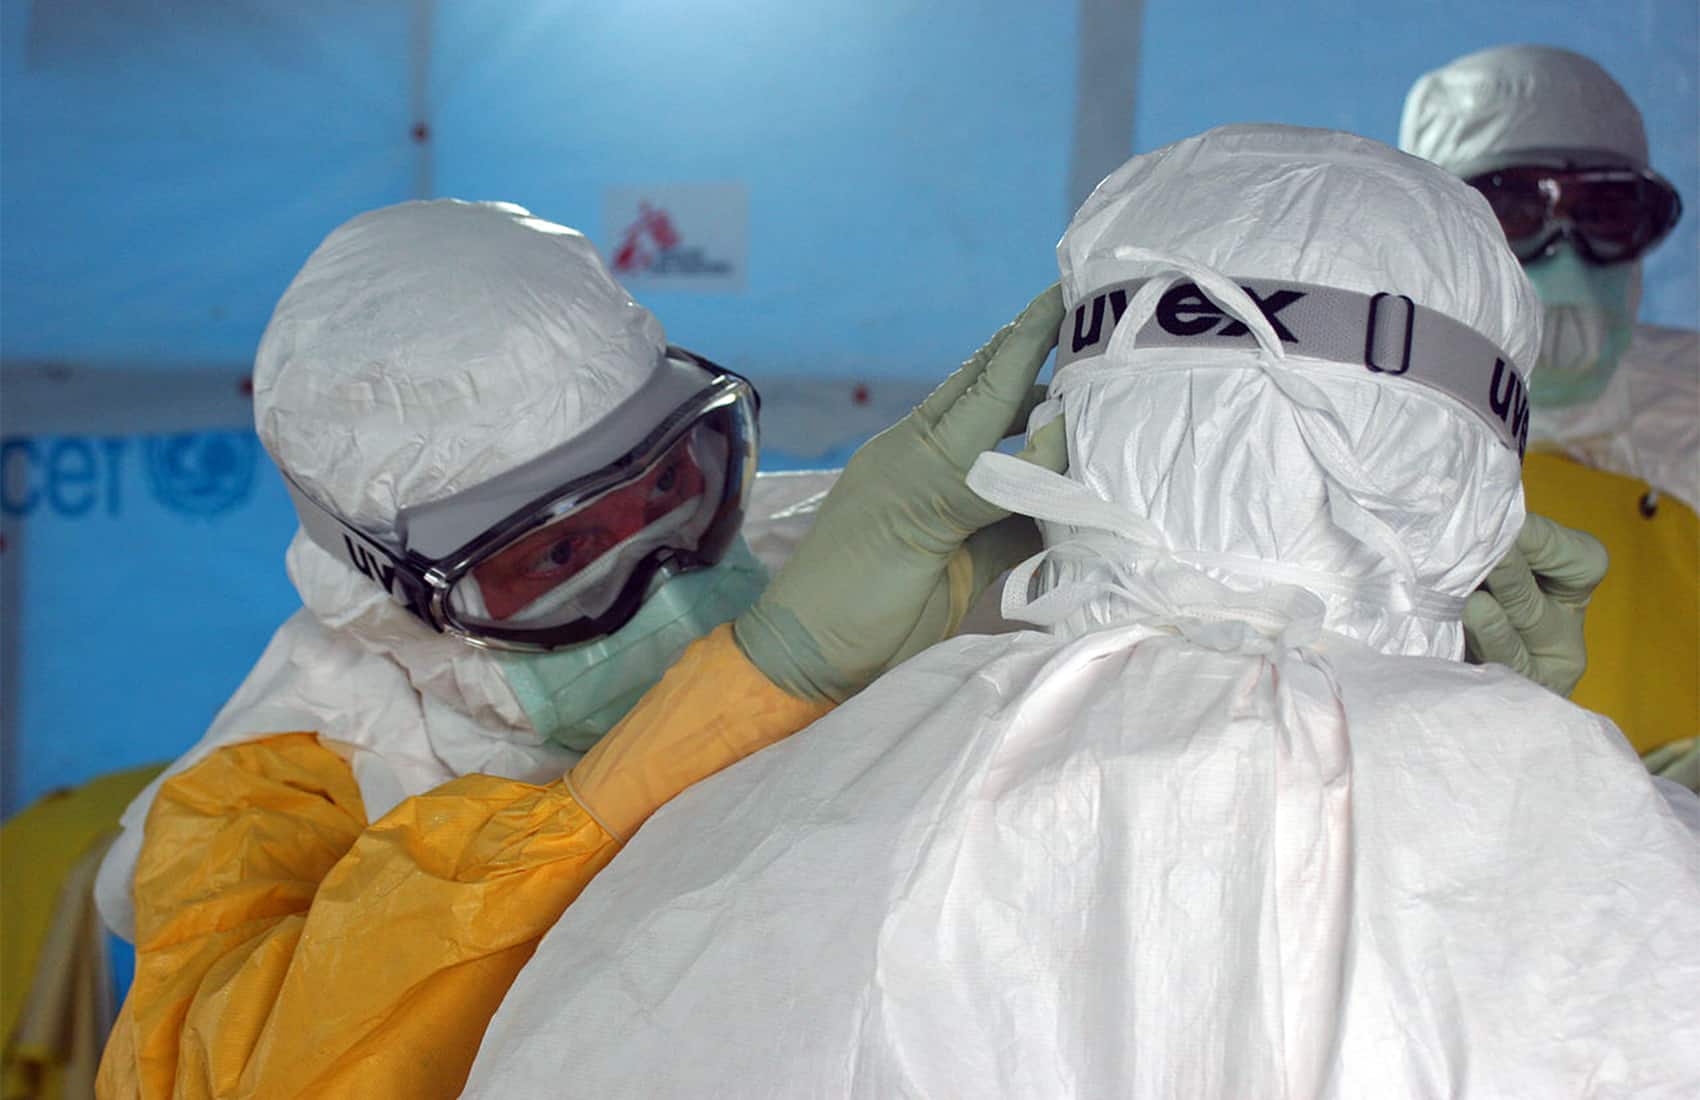 Ebola Virus protection suits